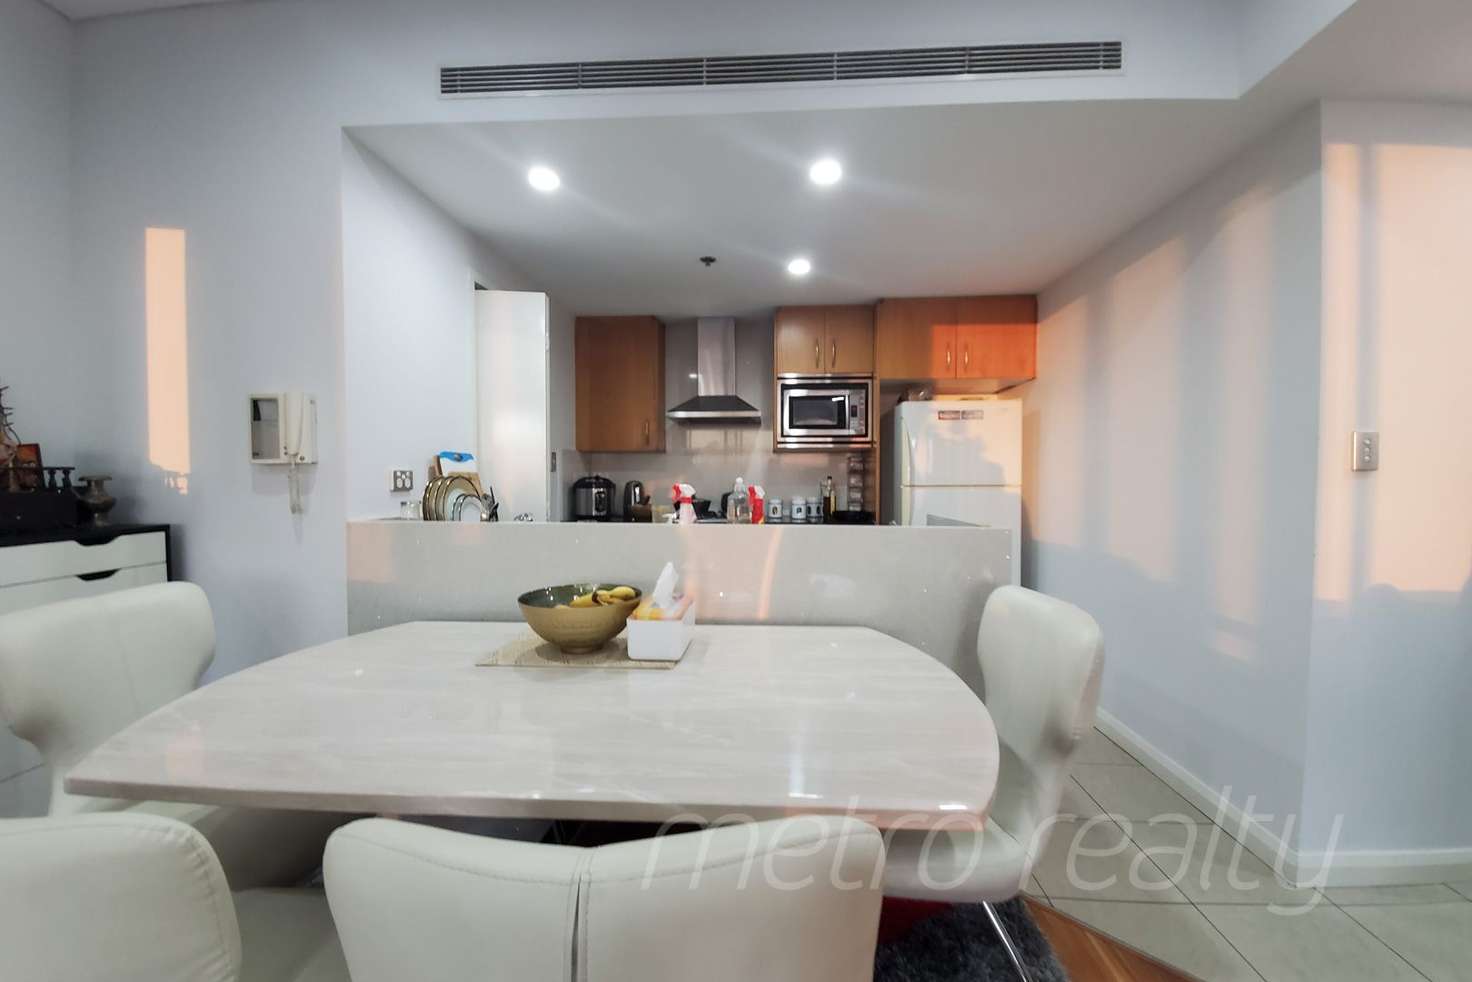 Main view of Homely apartment listing, 4808/93 Liverpool St, Sydney NSW 2000